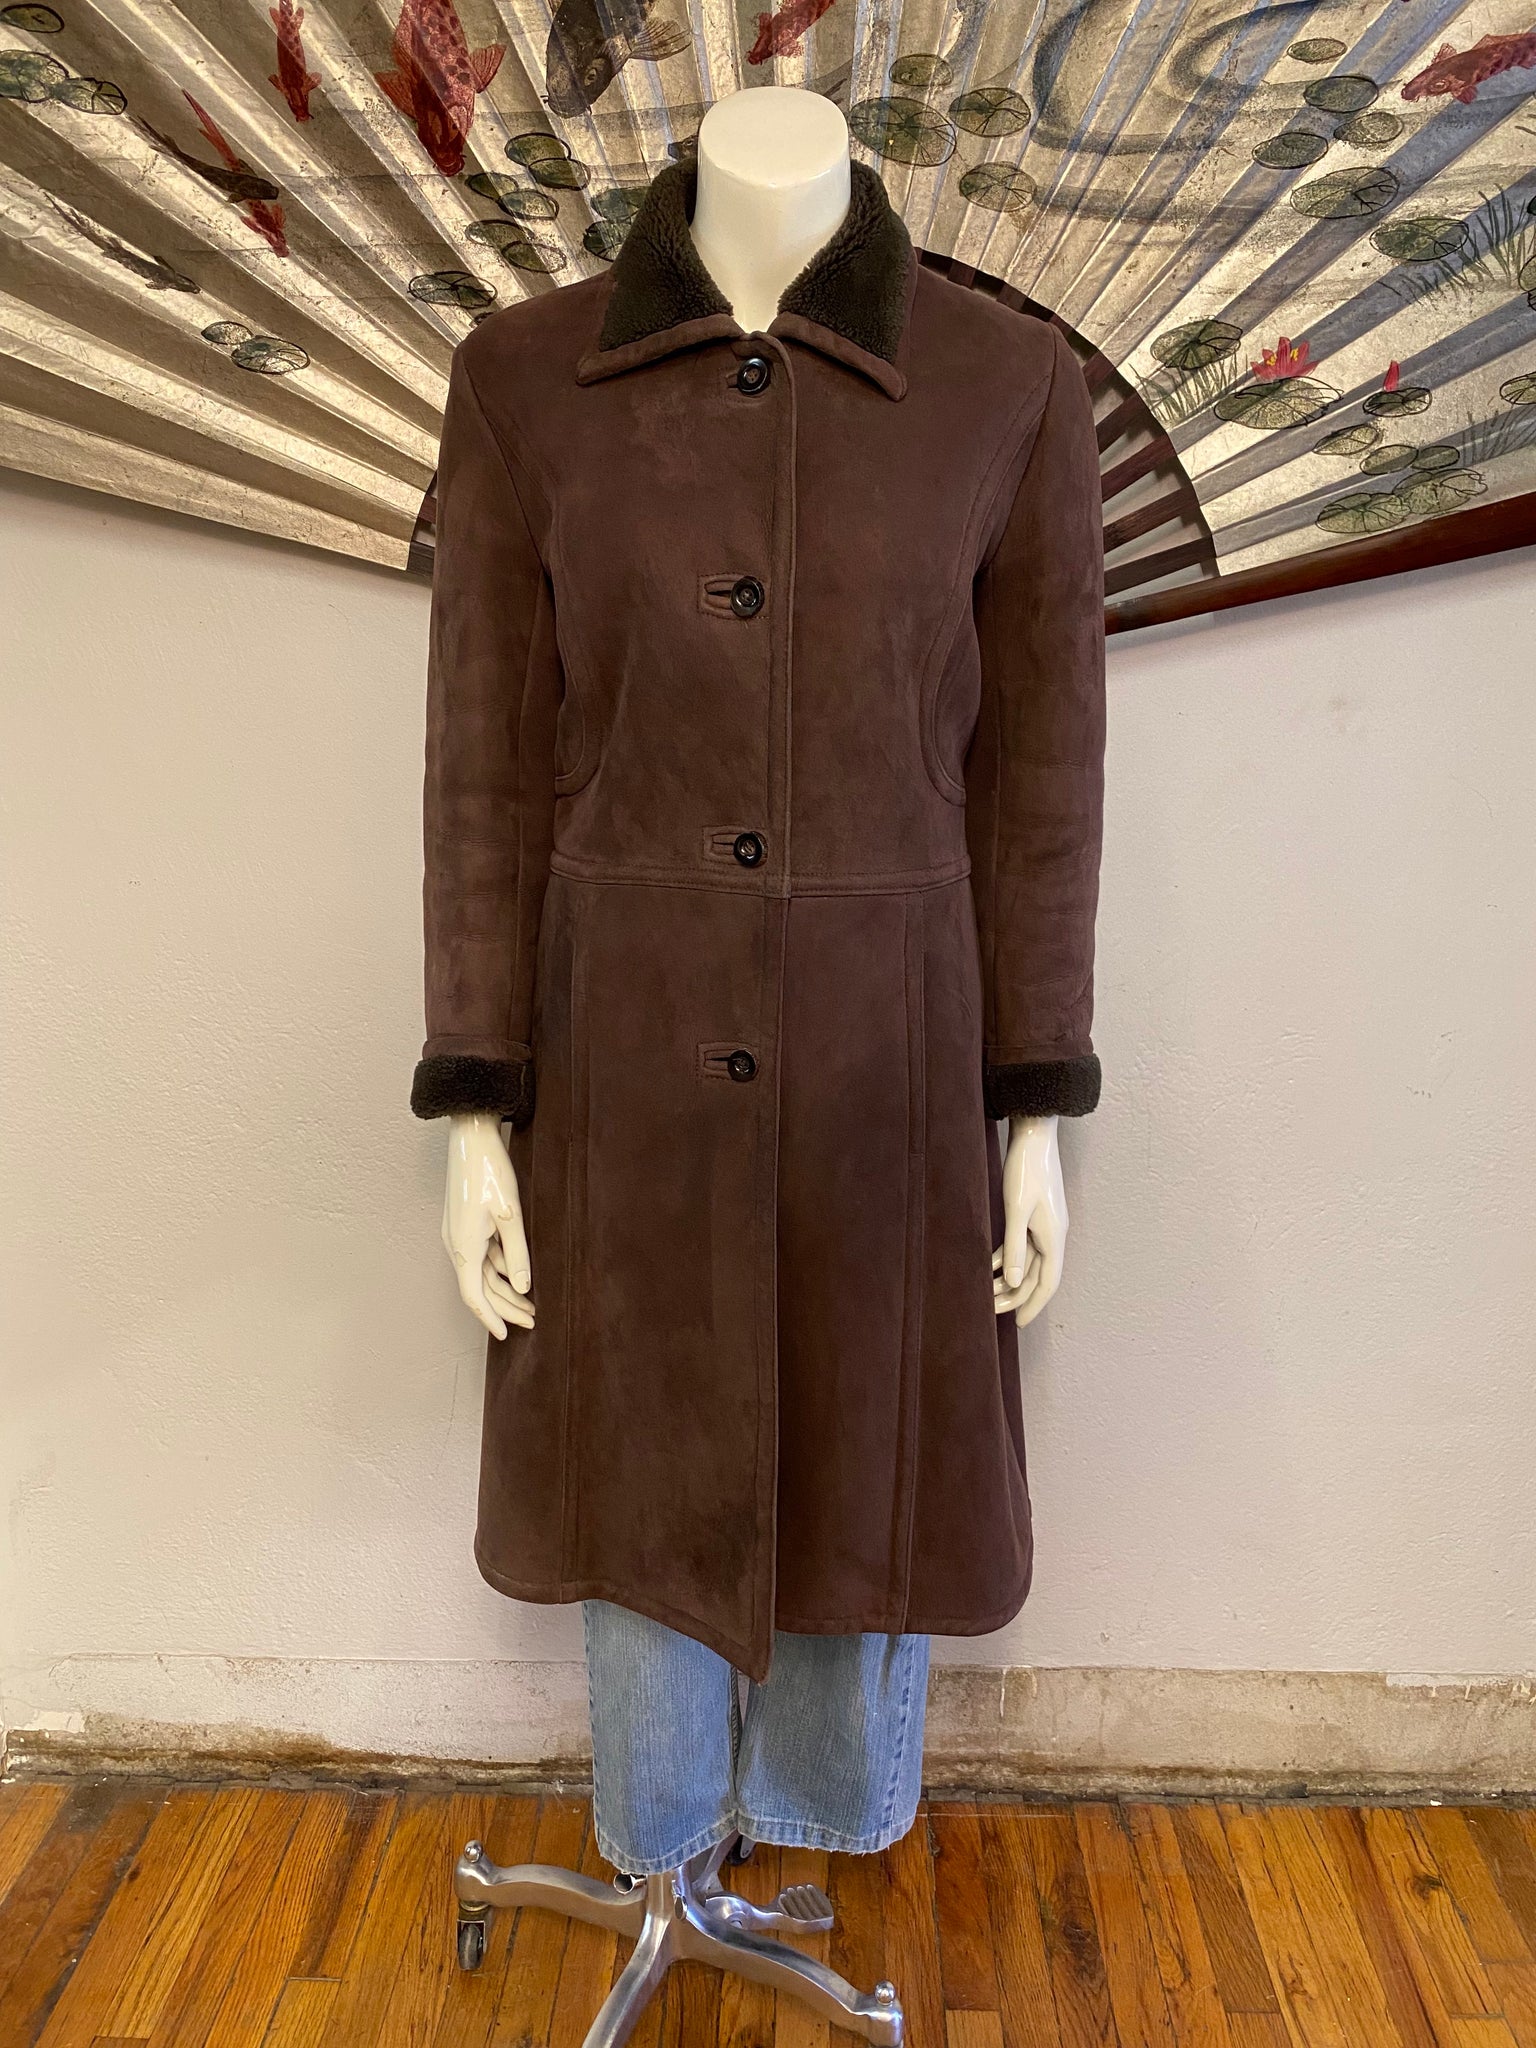 Fitted Shearling Coat, S / M